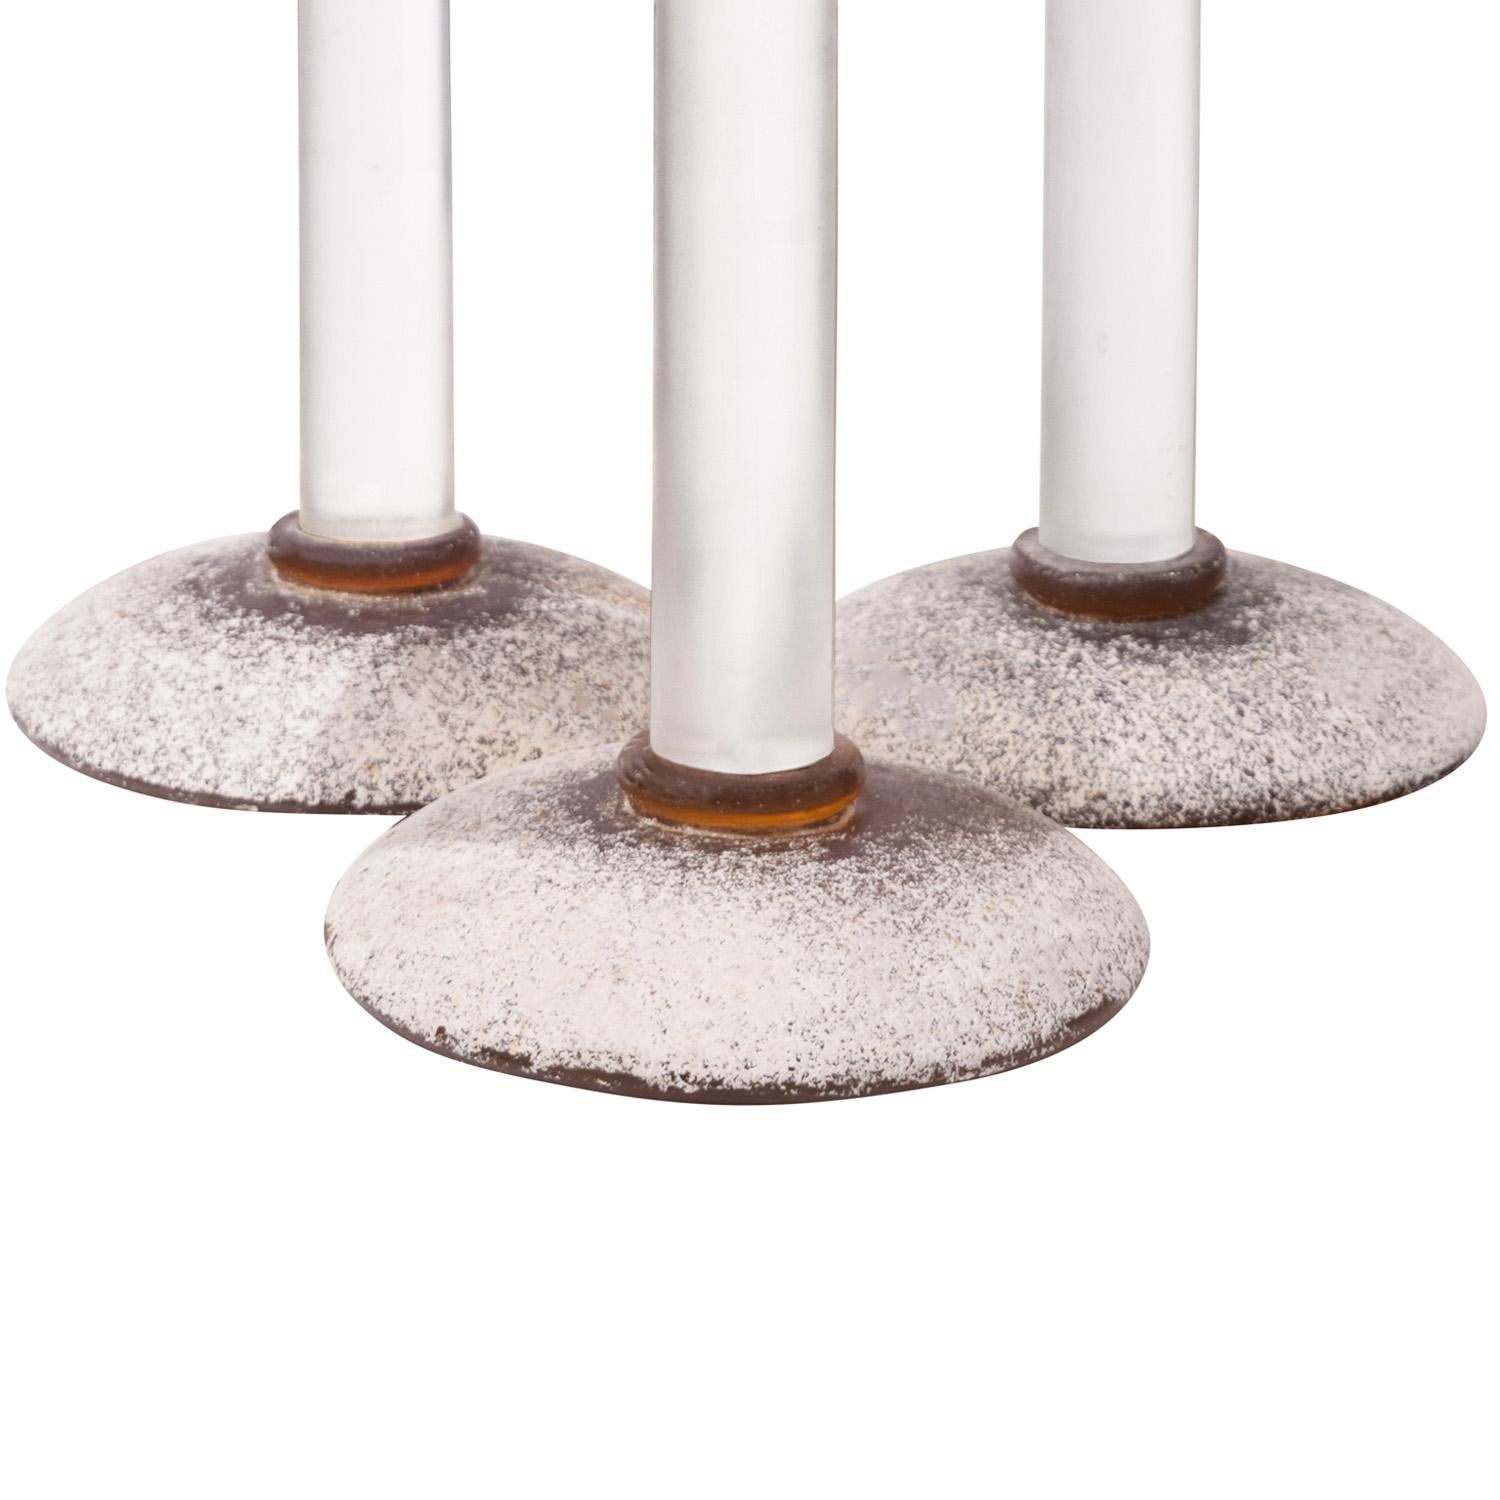 Karl Springer Set of 3 Unique Candle Holders in Lucite, 1980s In Excellent Condition For Sale In New York, NY